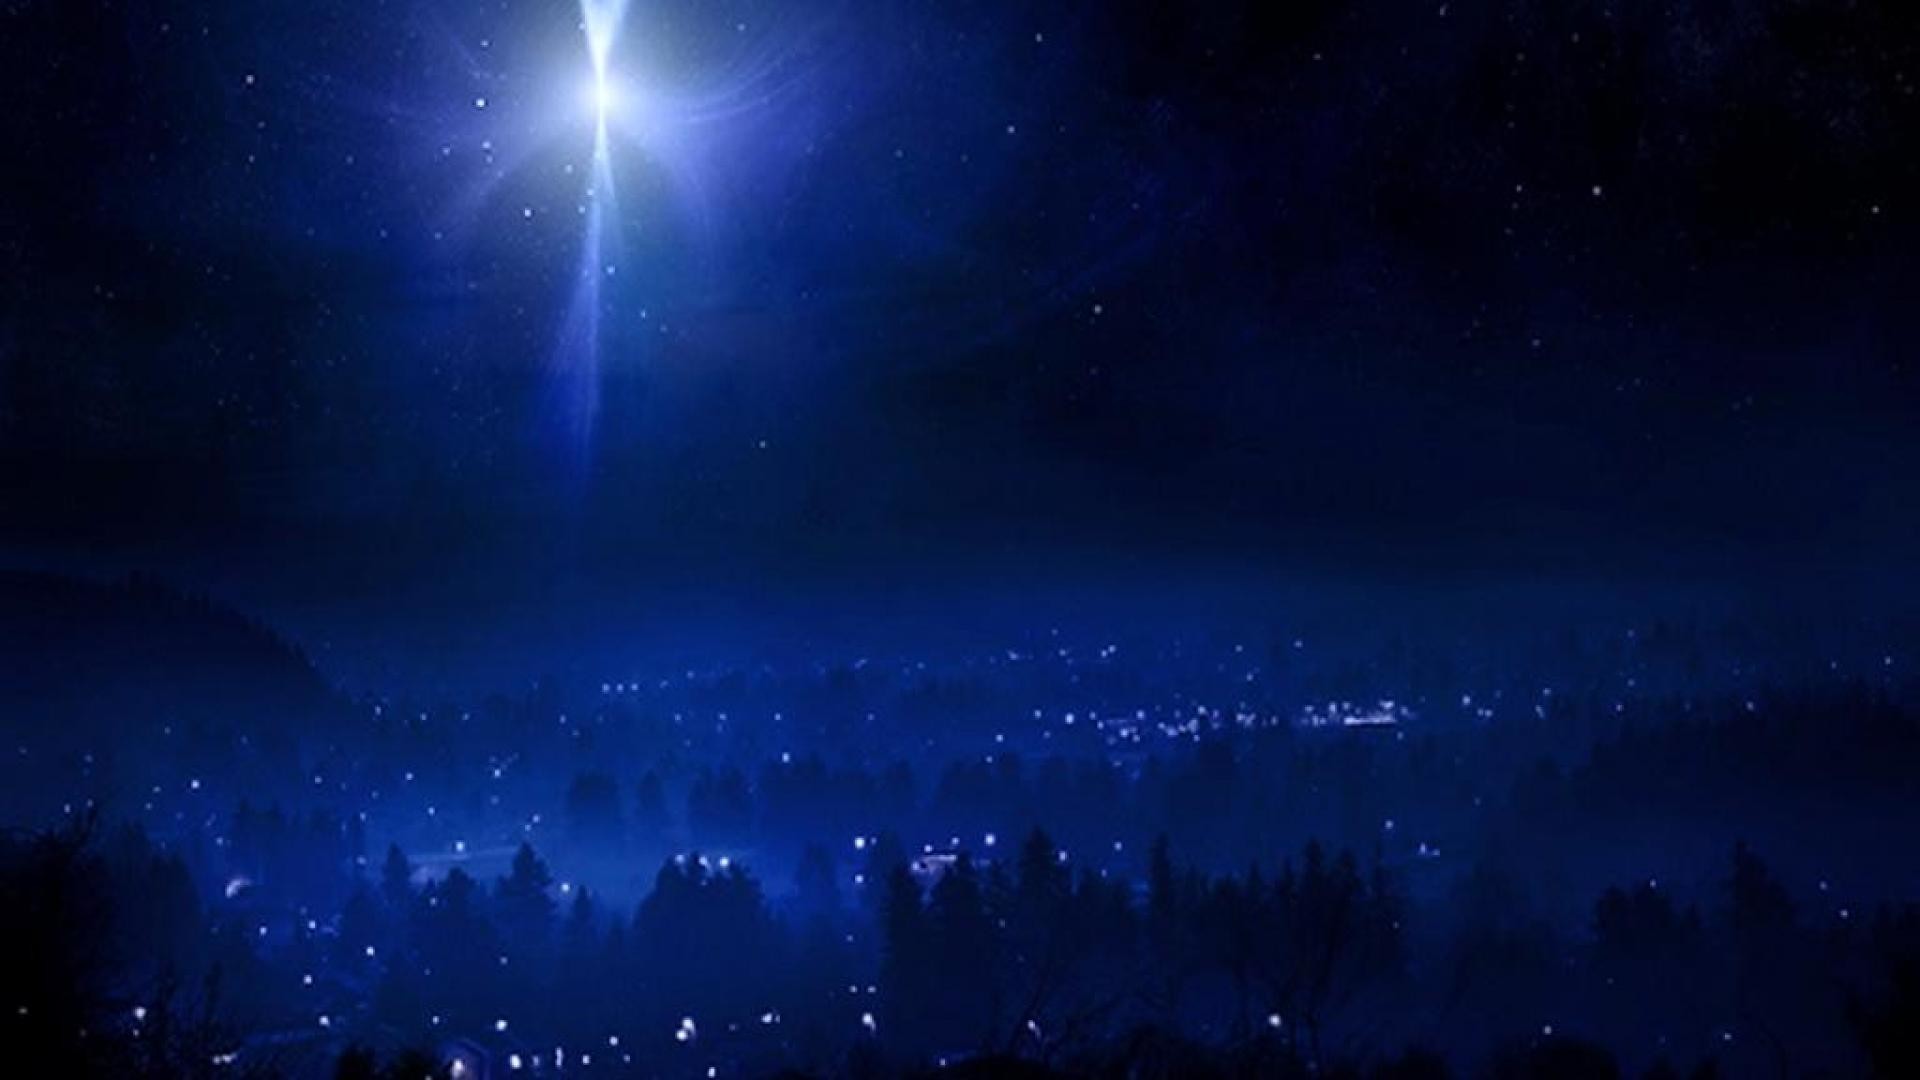 1920x1080 view image. Found on: christmas-star-background/